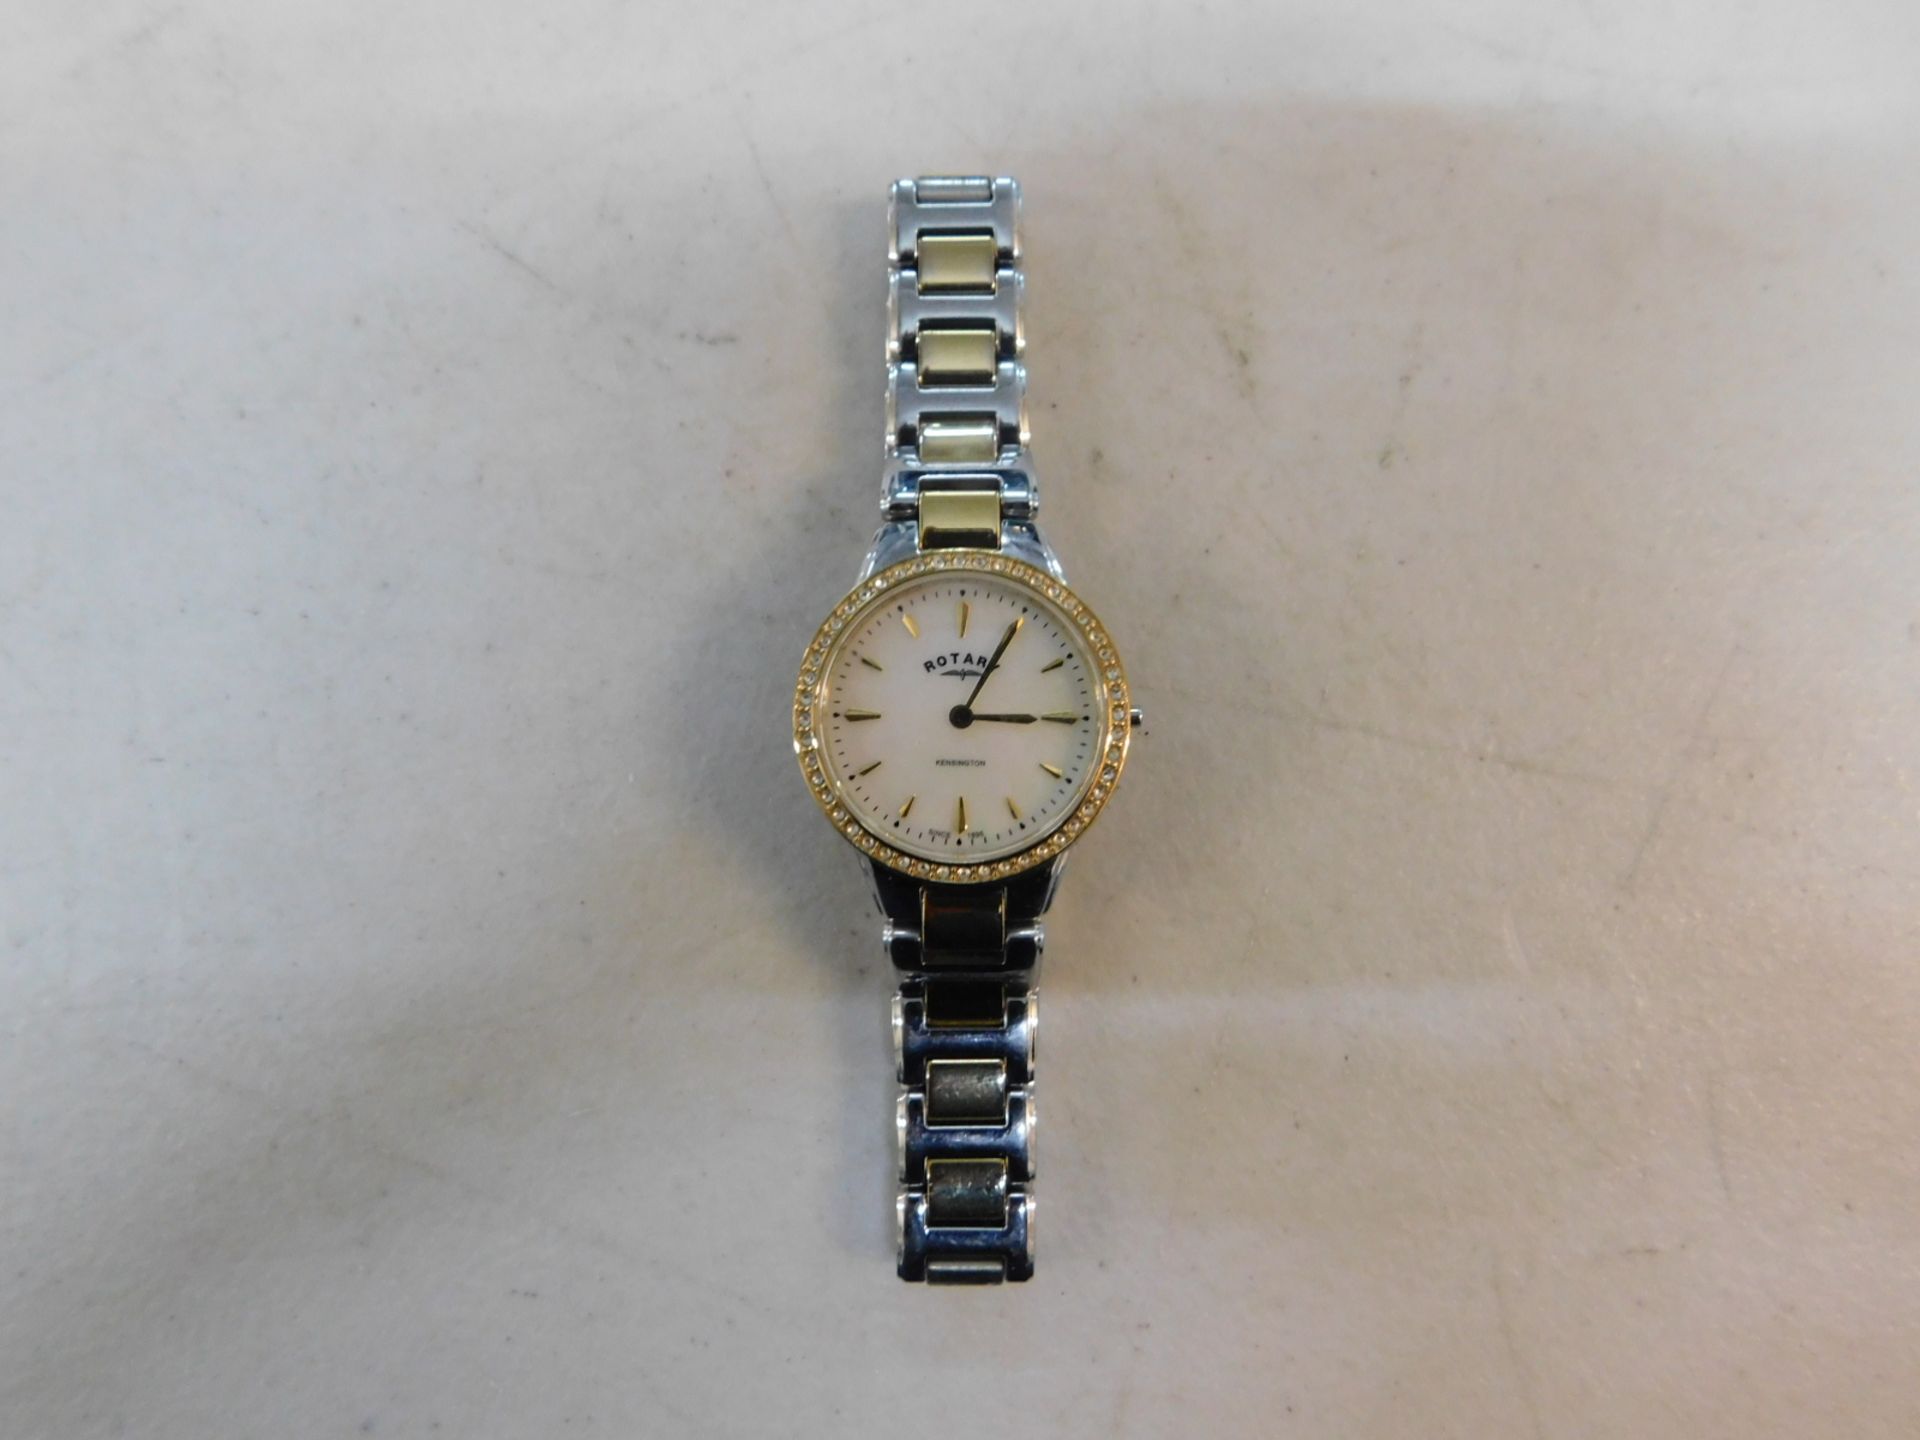 1 ROTARY WOMENS ANALOGUE CLASSIC QUARTZ WATCH WITH STAINLESS STEEL STRAP MODEL LB05276/41 RRP Â£